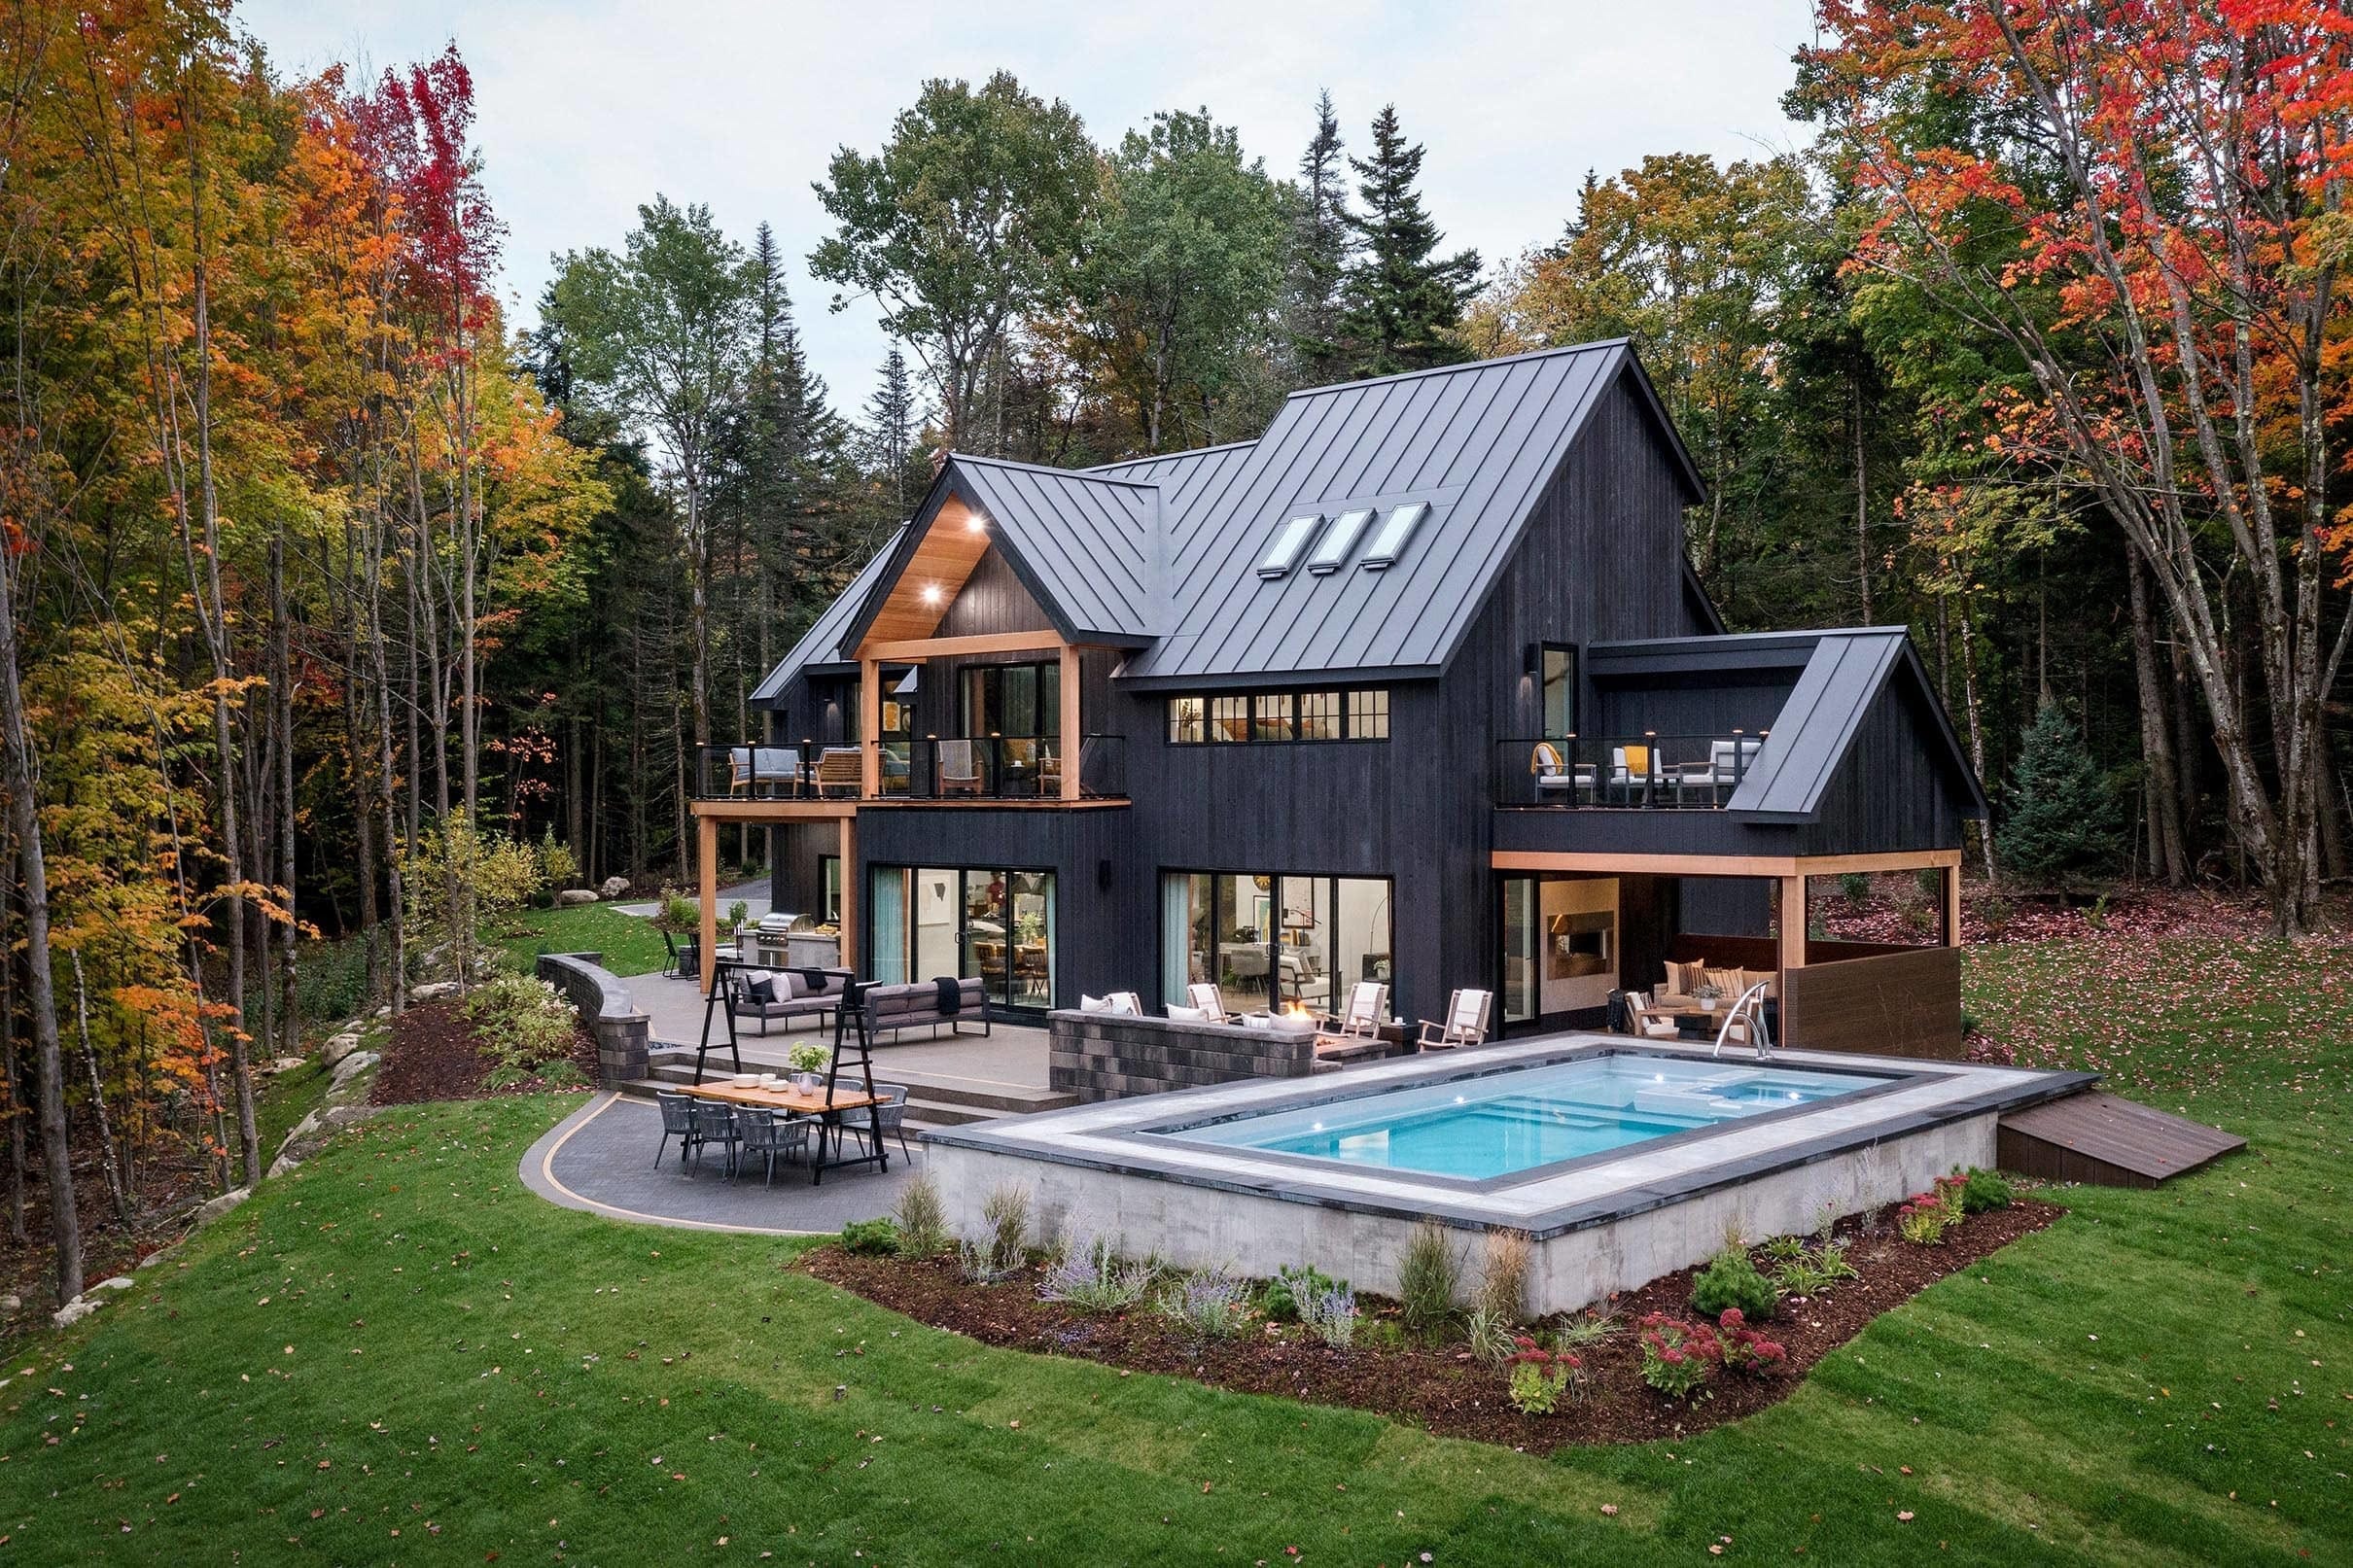 House black exterior fall leaves pool small